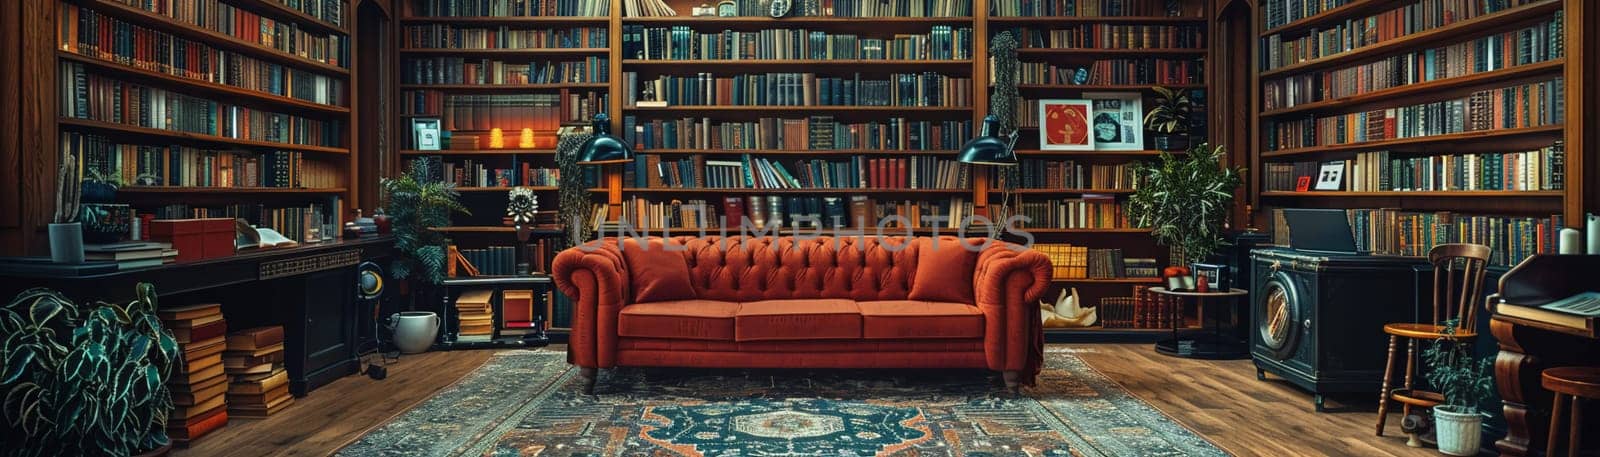 Home library with shelves of books, evoking the love of literature and knowledge